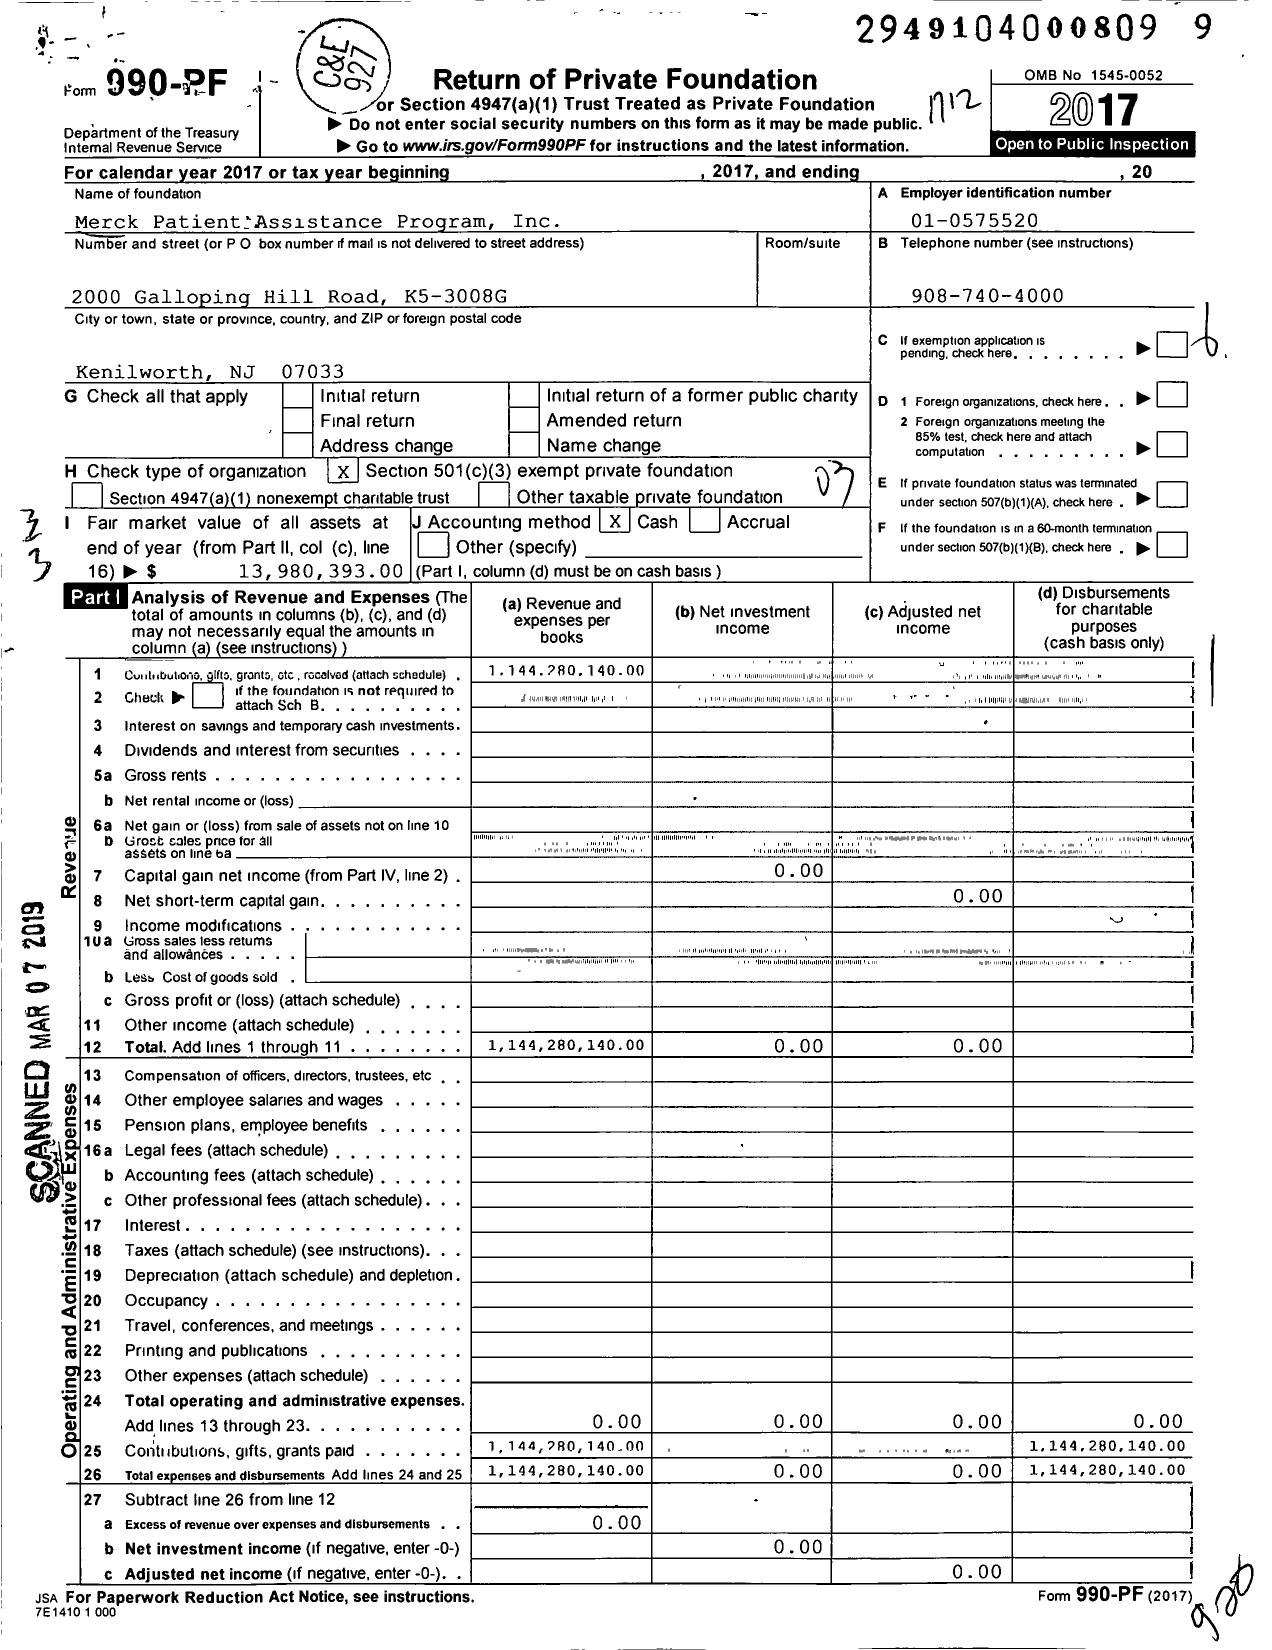 Image of first page of 2017 Form 990PF for Merck Patient Assistance Program